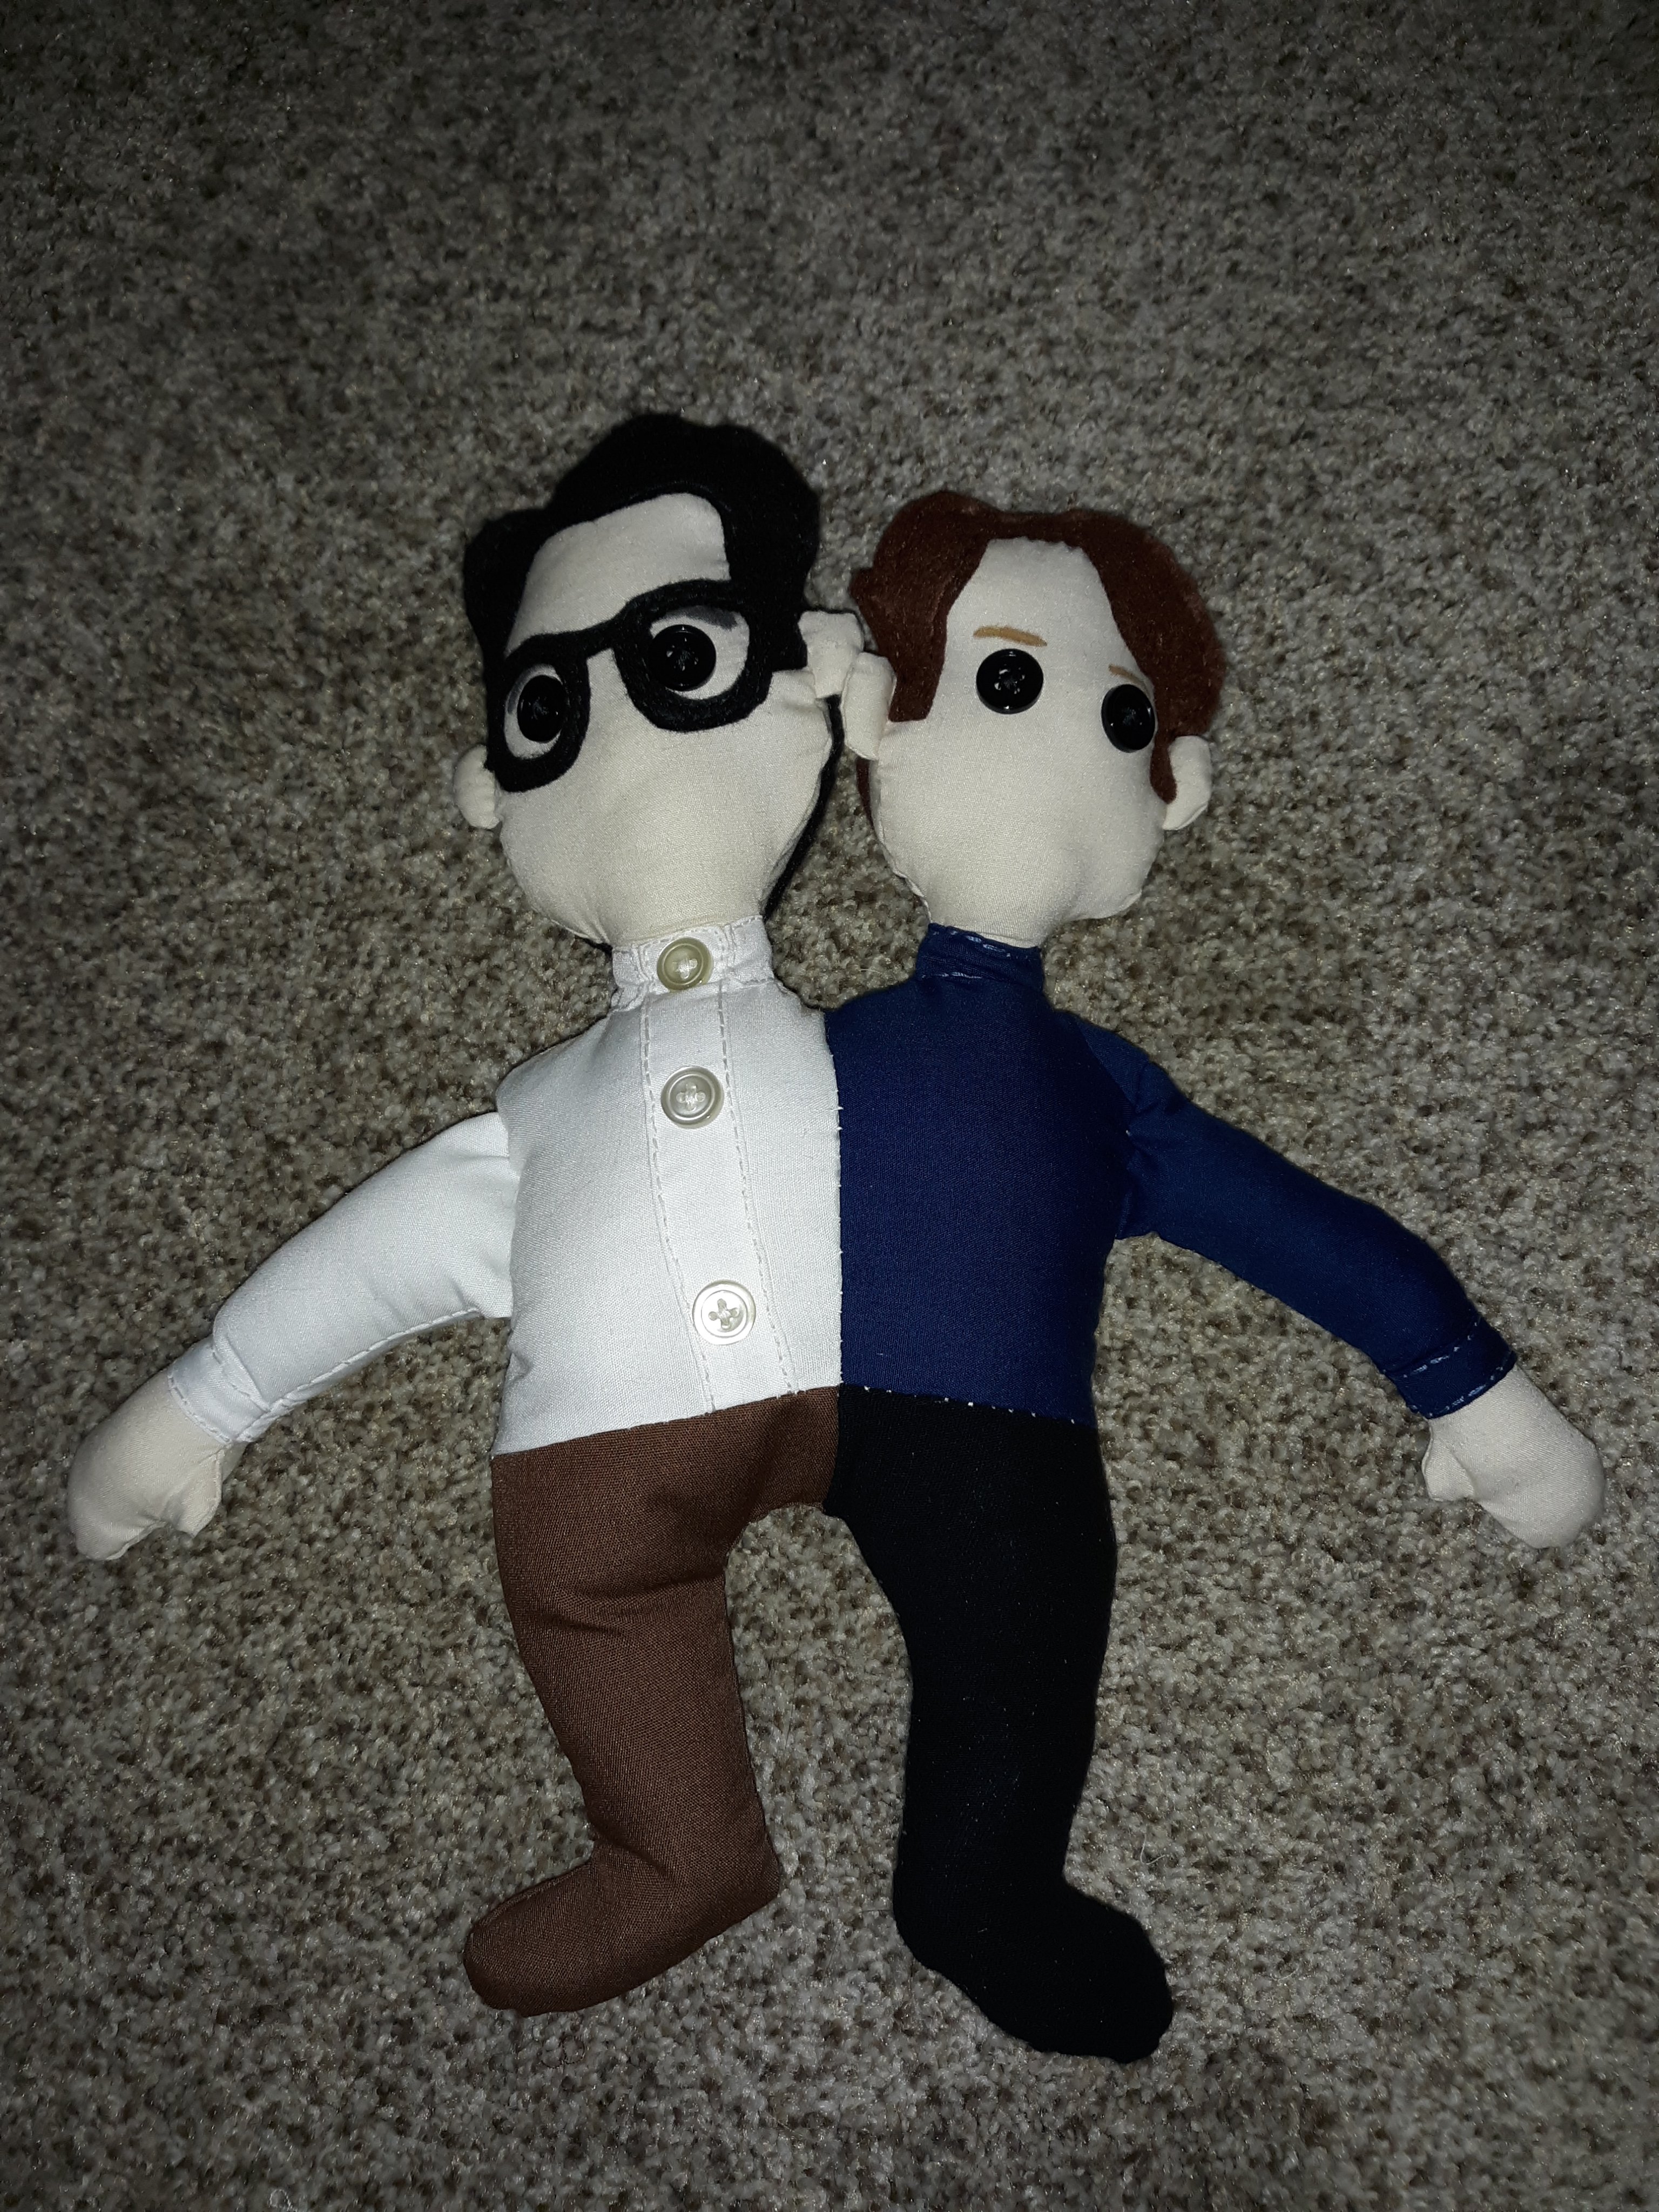 A doll of a young John Flansburgh and a young John Linnell sewn together as one. Flansburgh is on the left side wearing a white button up and brown pants. He has three buttons going down his shirt. He has short black hair and is wearing black glasses. He has two black buttons for eyes. Linnell is on the right side and is wearing a dark blue turtleneck with black pants. He has short brown hair and has two black buttons for eyes.